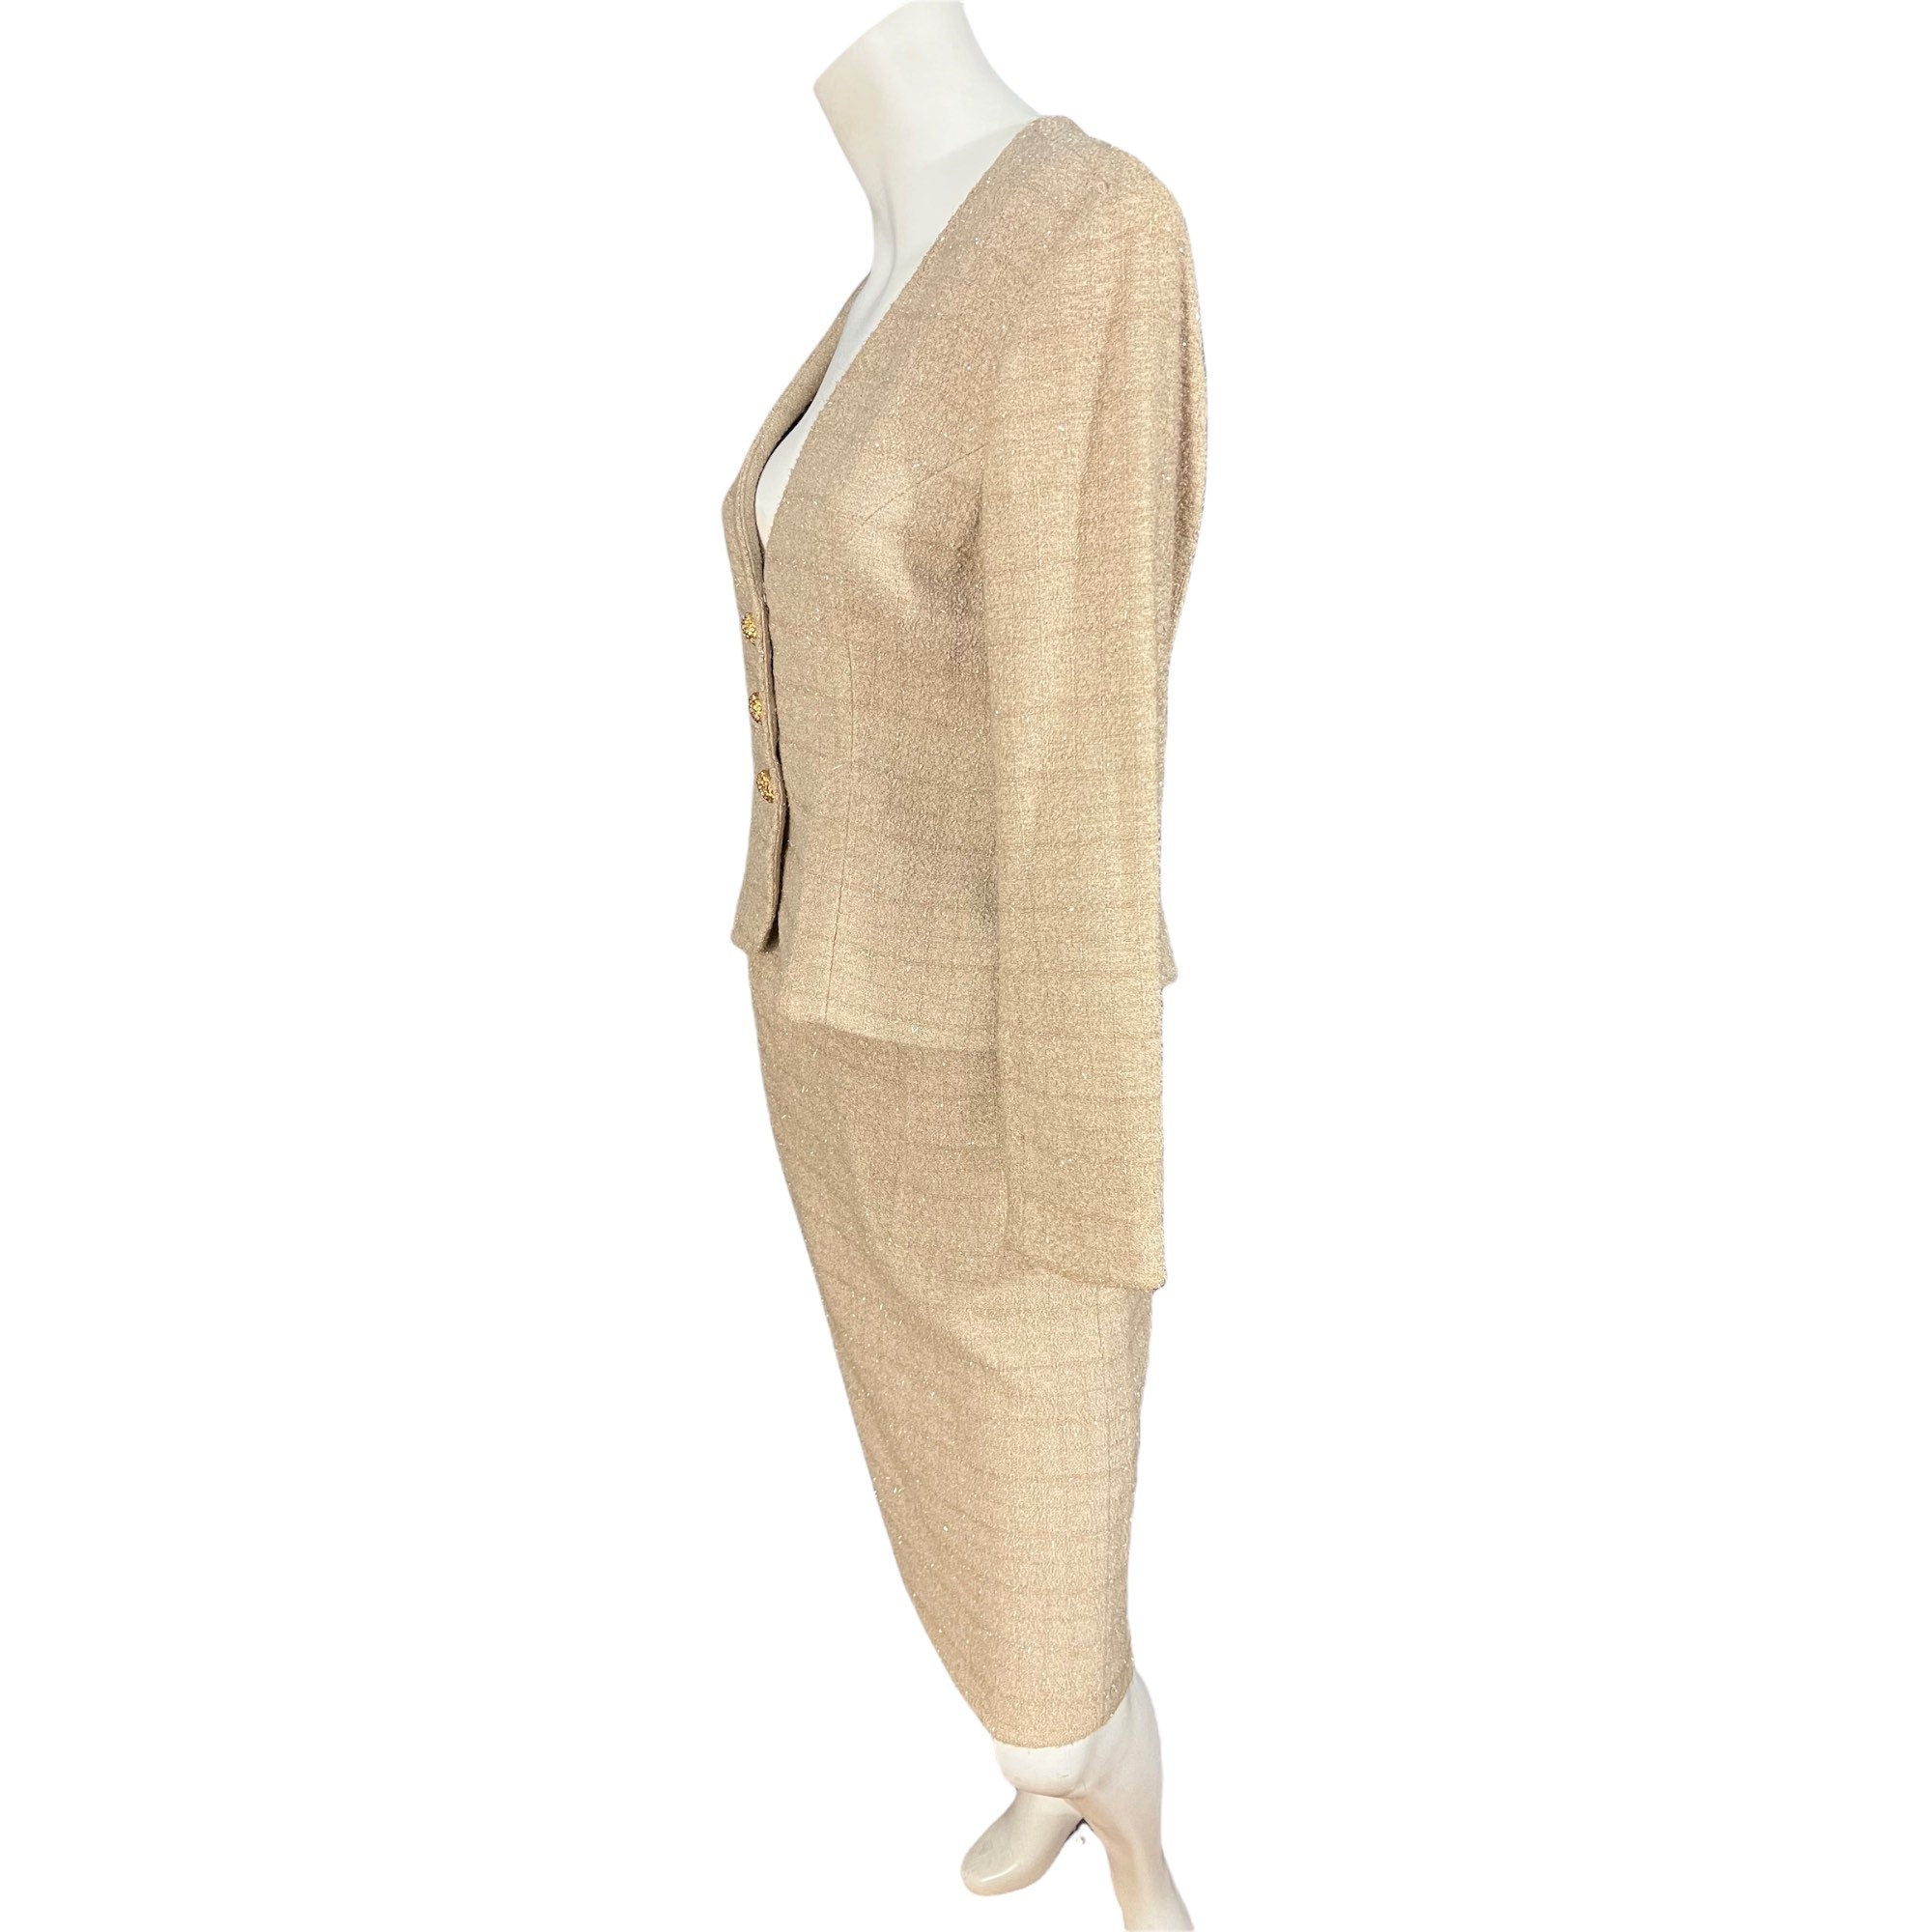 Vintage Victor Costa suit 4 gold and tan